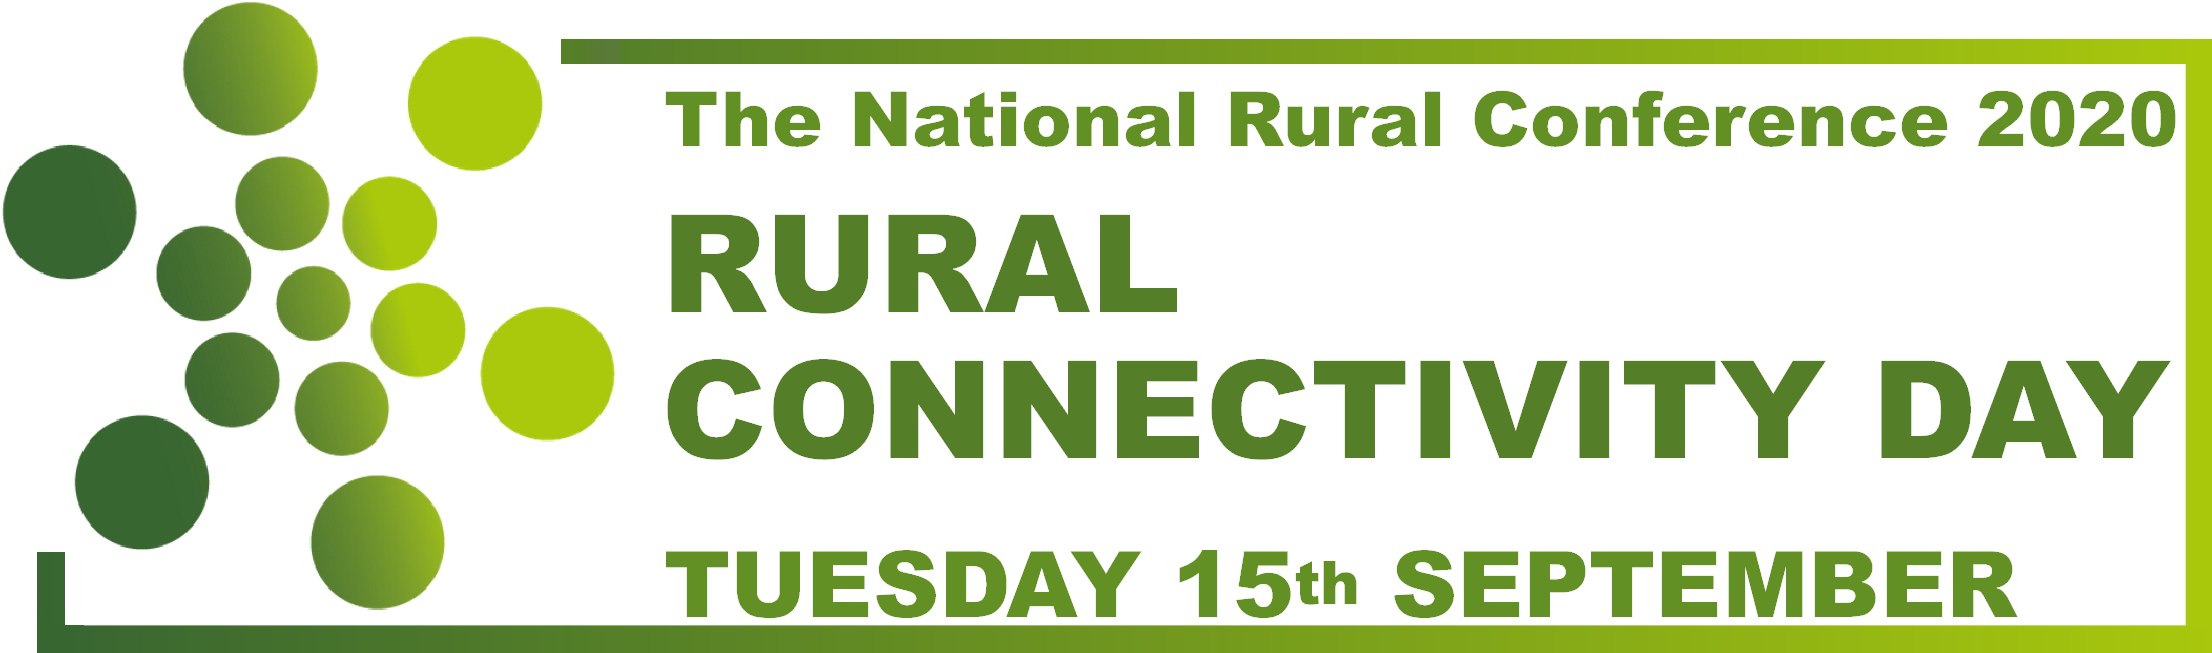 The National Rural Conference 2020 Rural Services Network